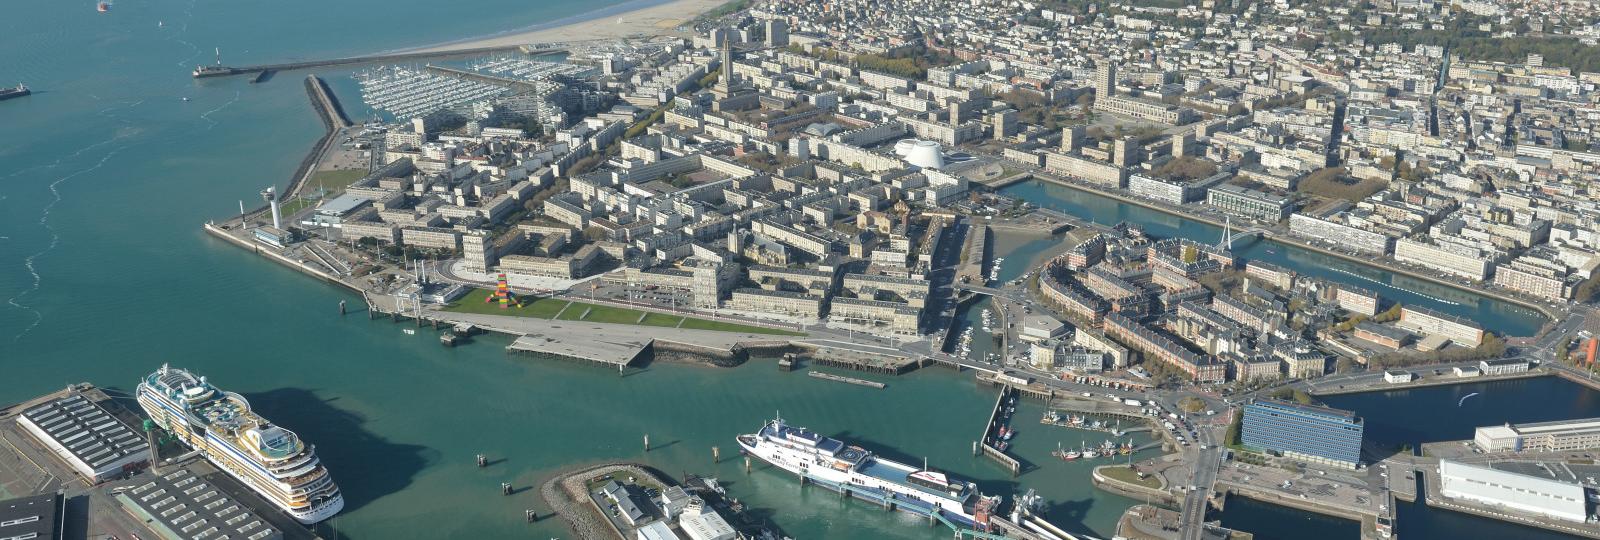 Le Havre Port Opens Call for RoRo Platform Construction